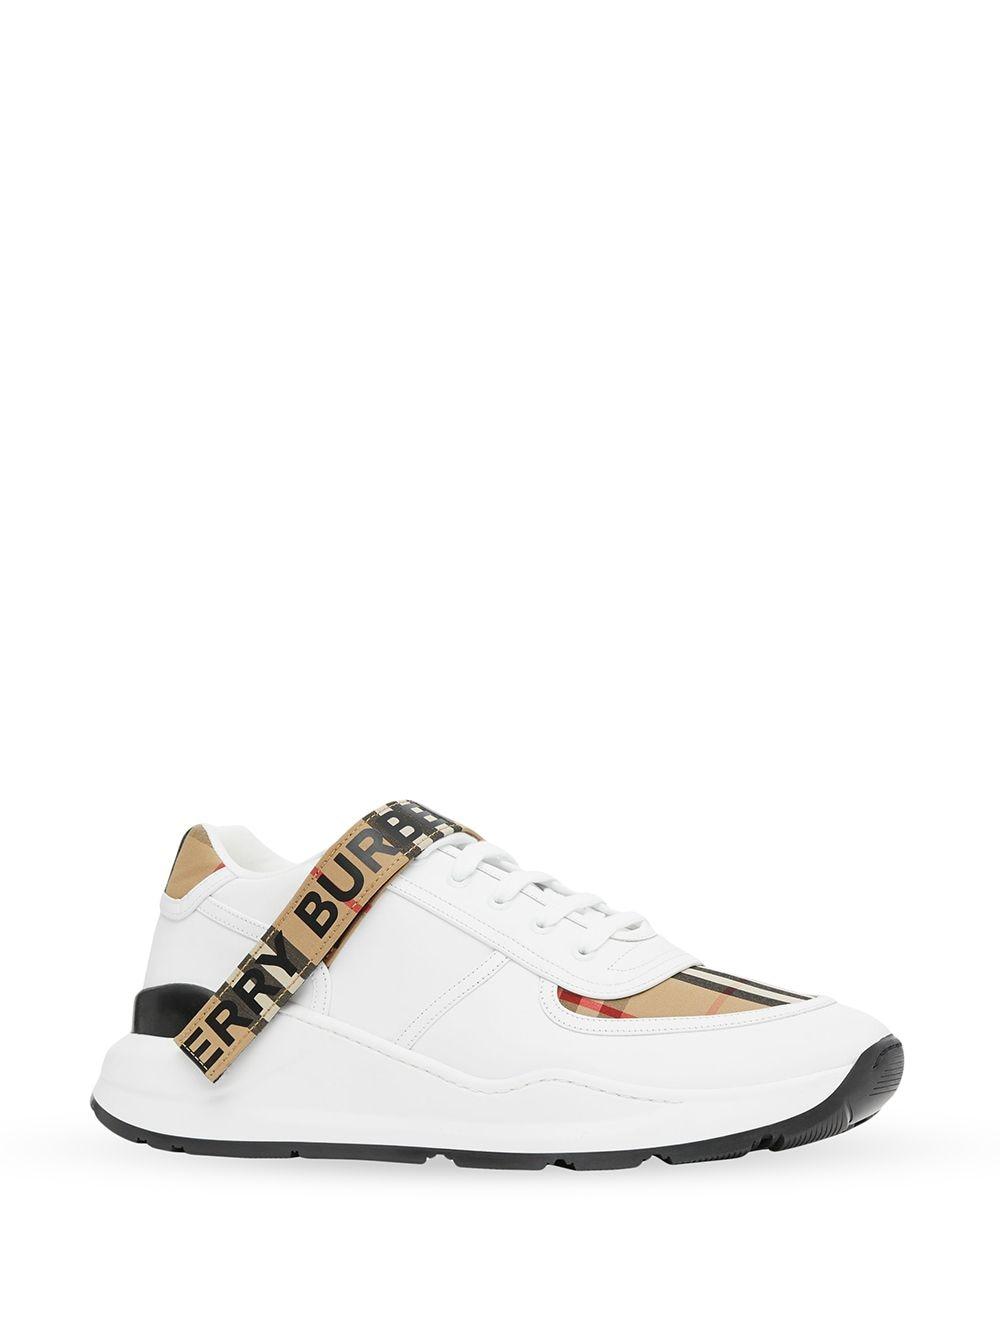 Burberry Ronnie Sneaker in Beige (White) for Men | Lyst